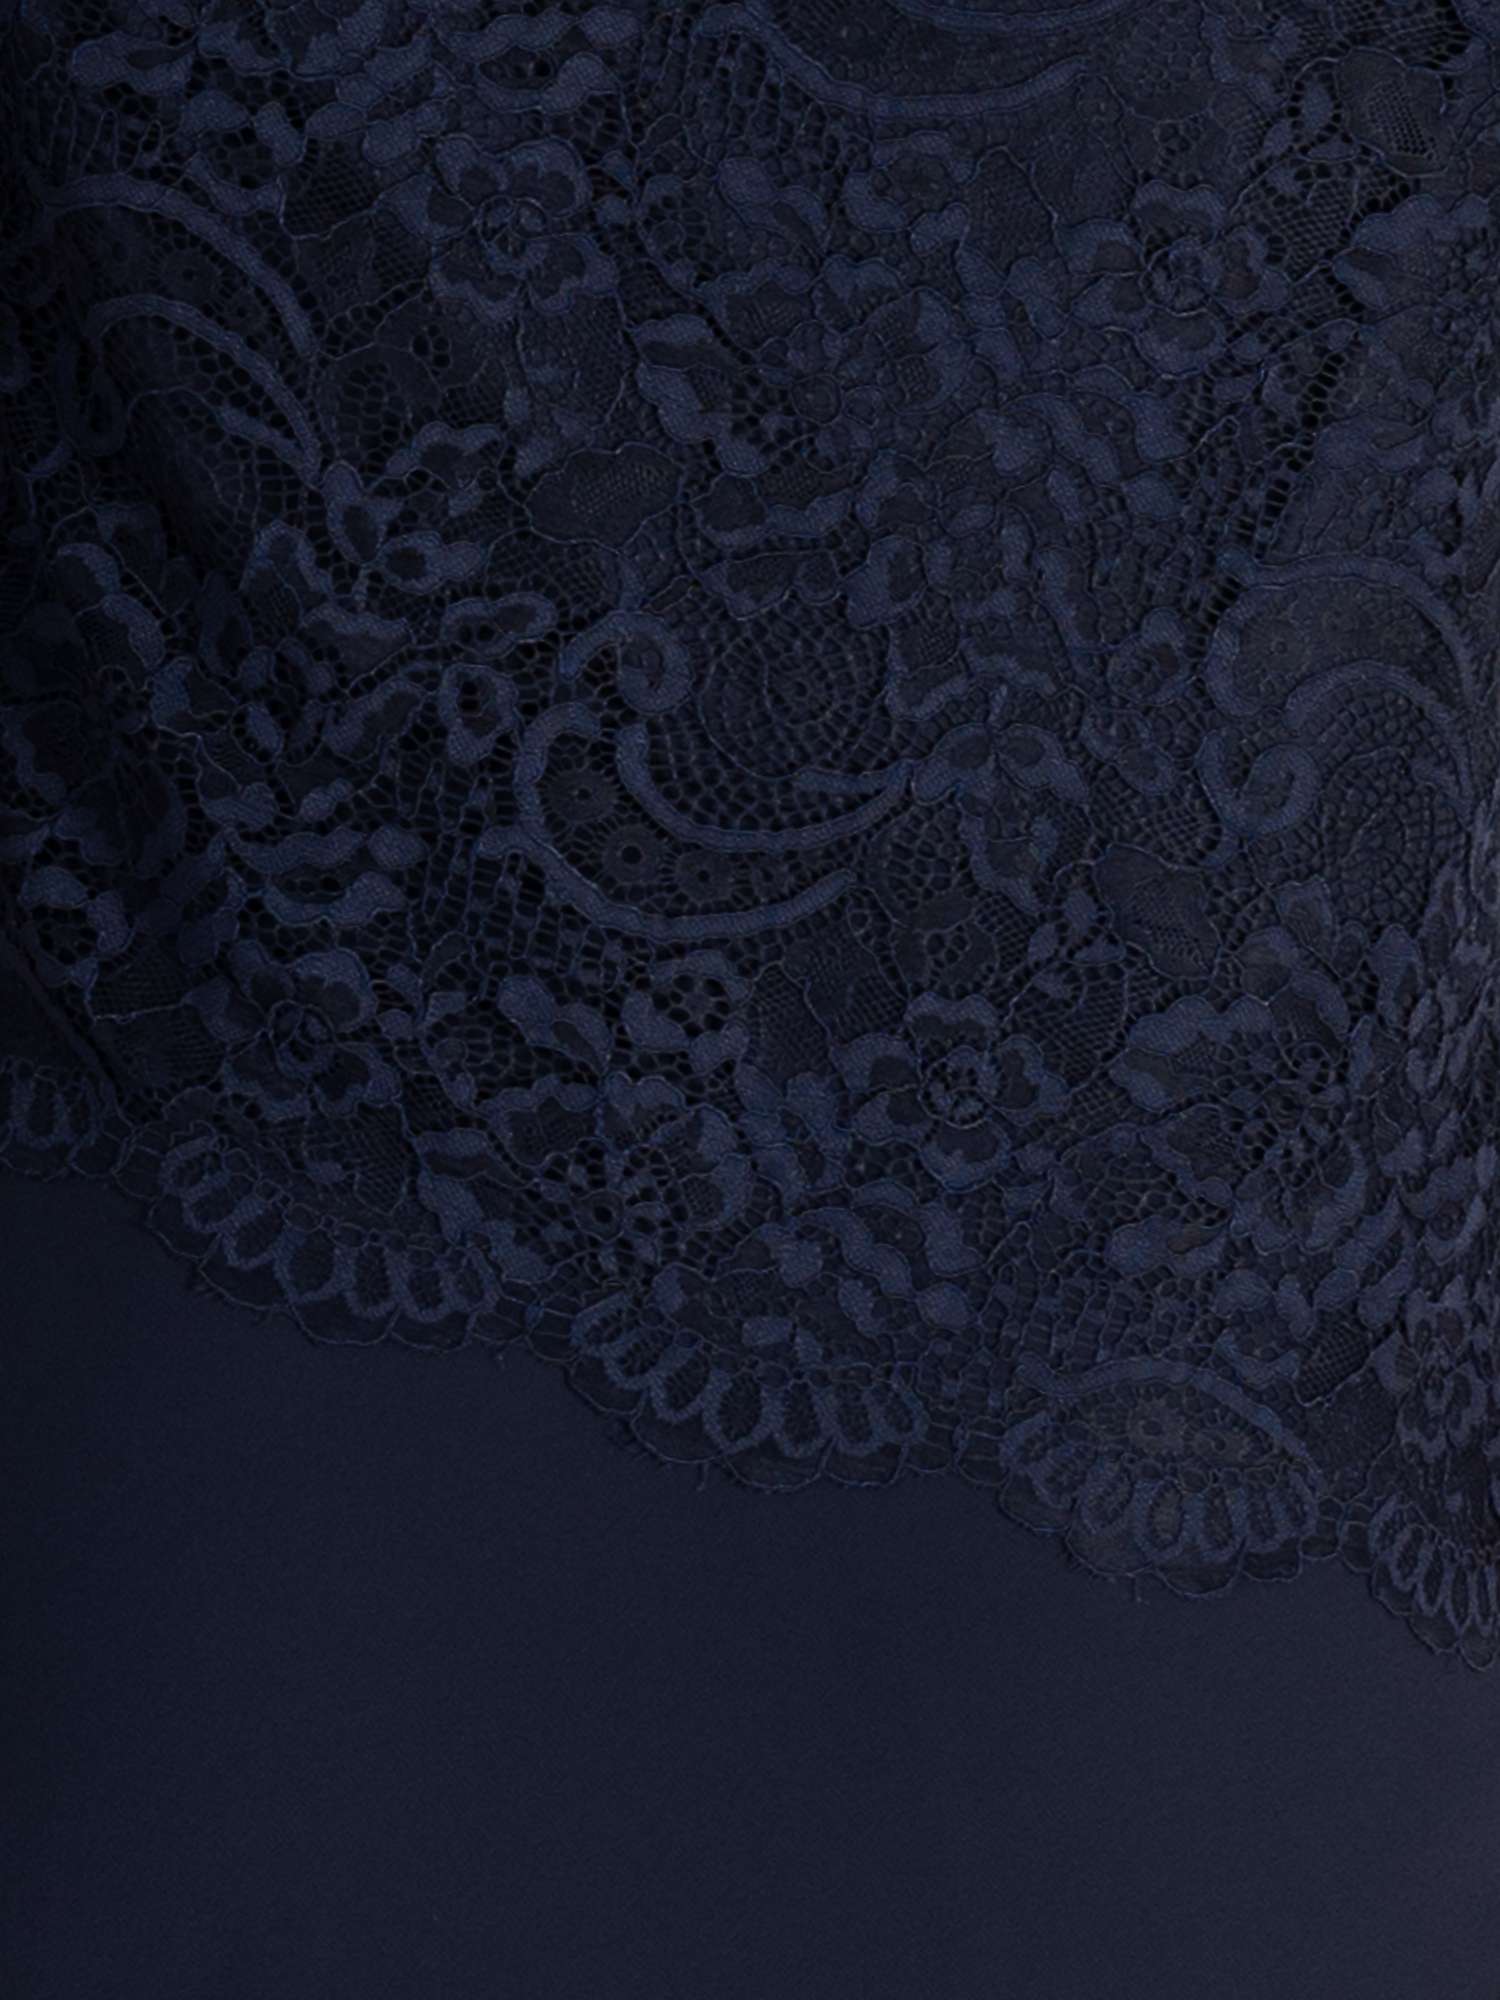 Buy chesca Layered Lace Dress, Navy Online at johnlewis.com